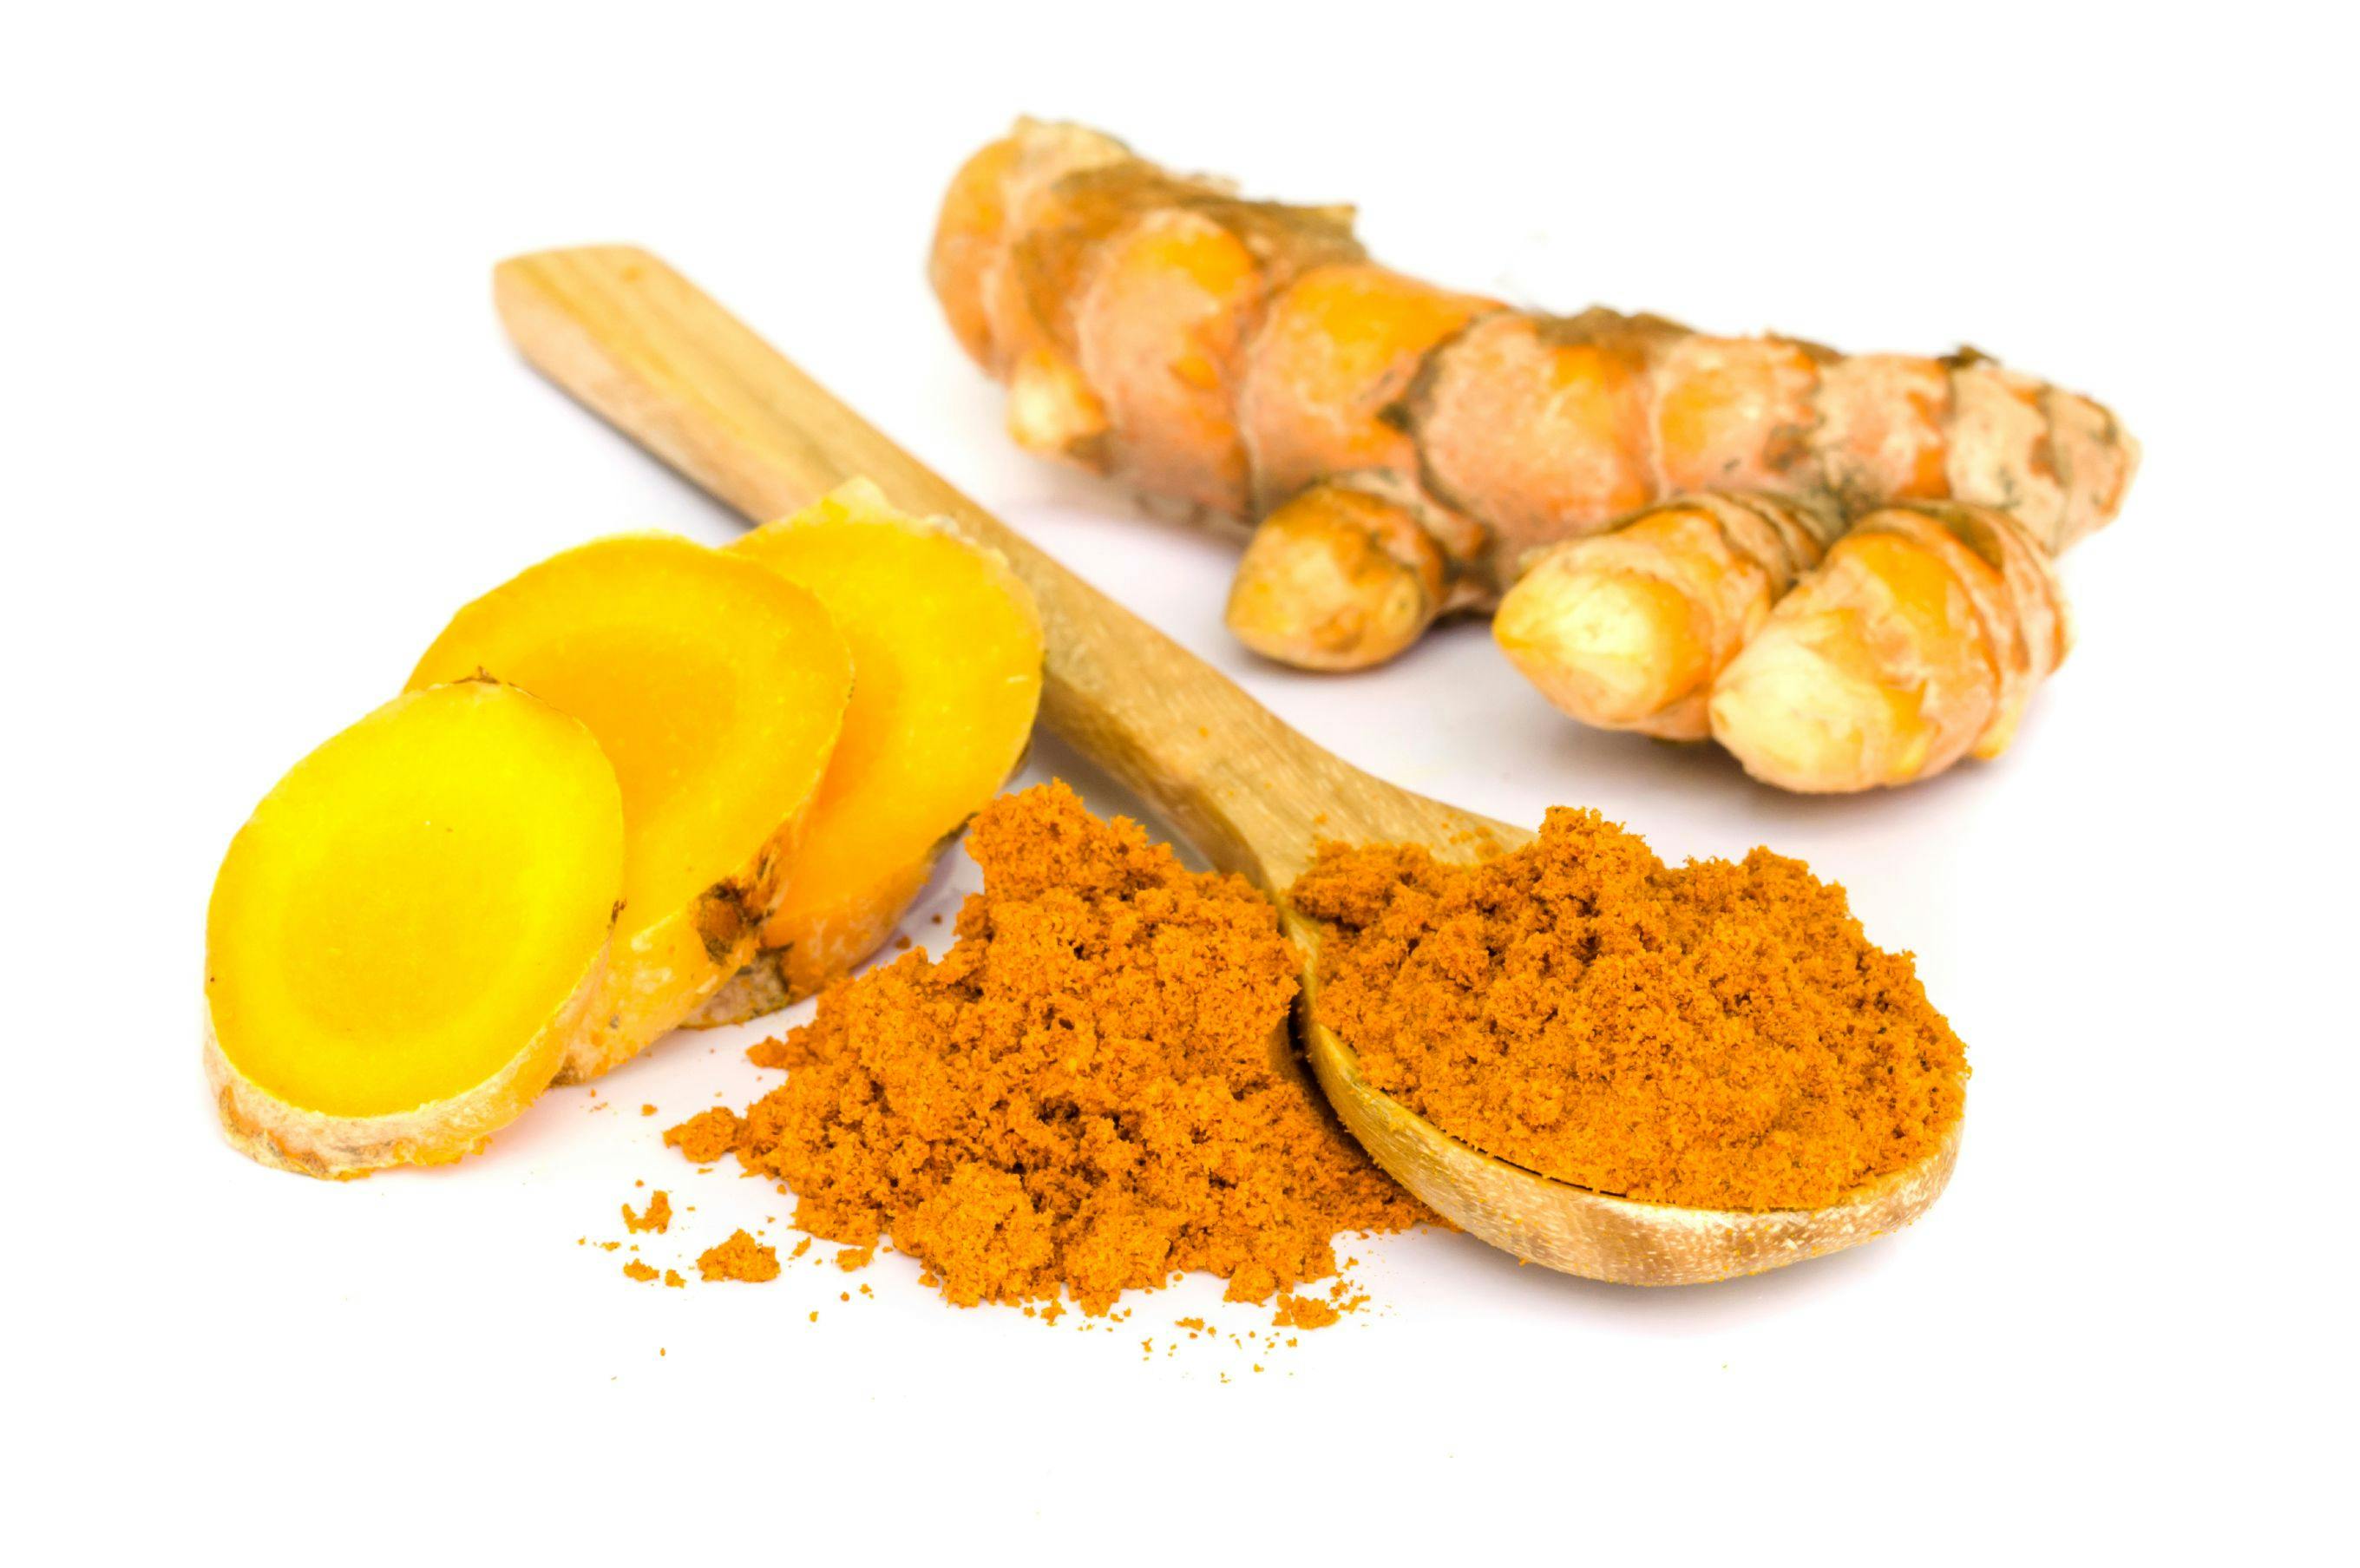 New Curcumin Ingredient Aims for High Level of One Specific Curcuminoid to Boost Anti-Inflammatory Activity